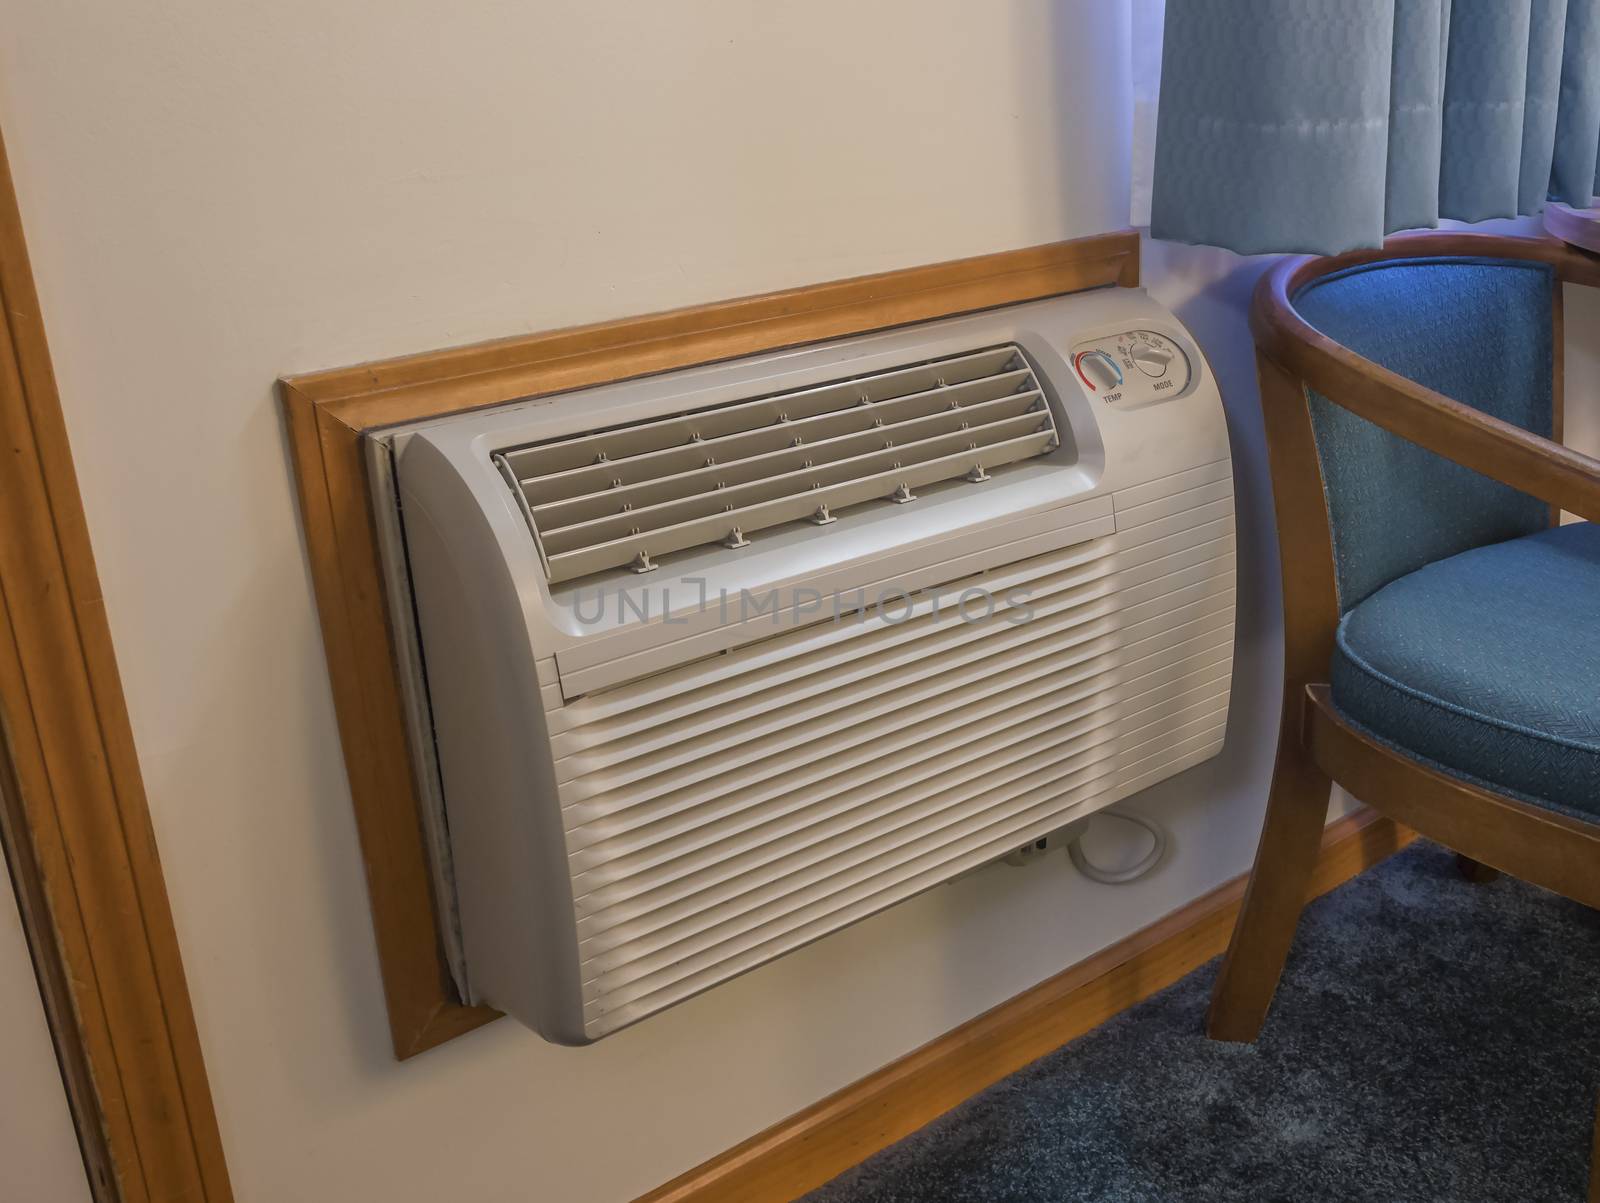 HVAC unit used in most hotel and motel rooms